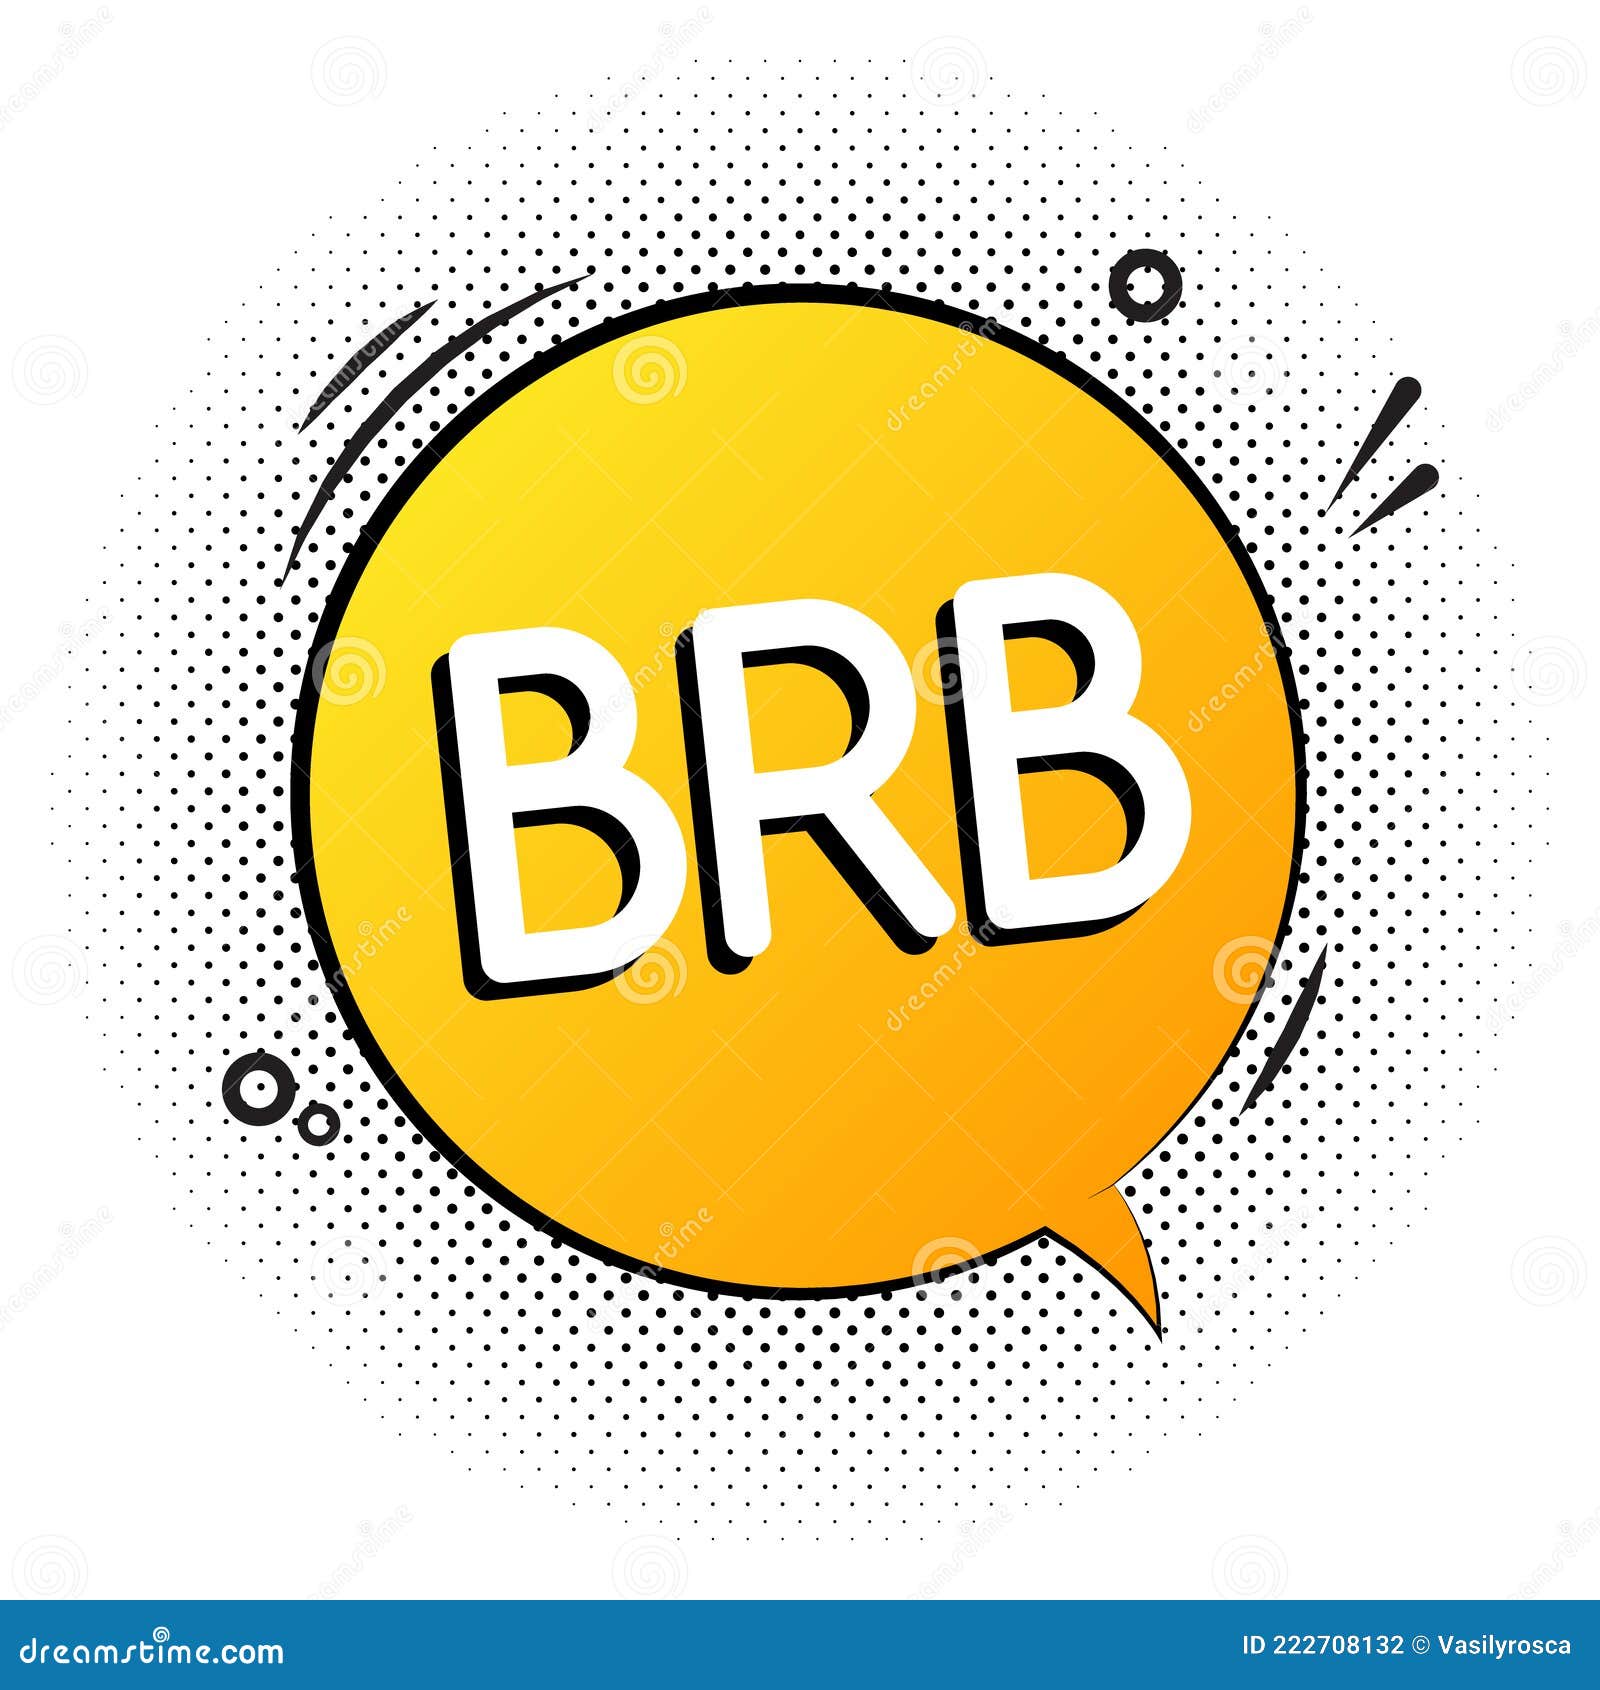 267 Brb Stock Photos - Free & Royalty-Free Stock Photos from Dreamstime